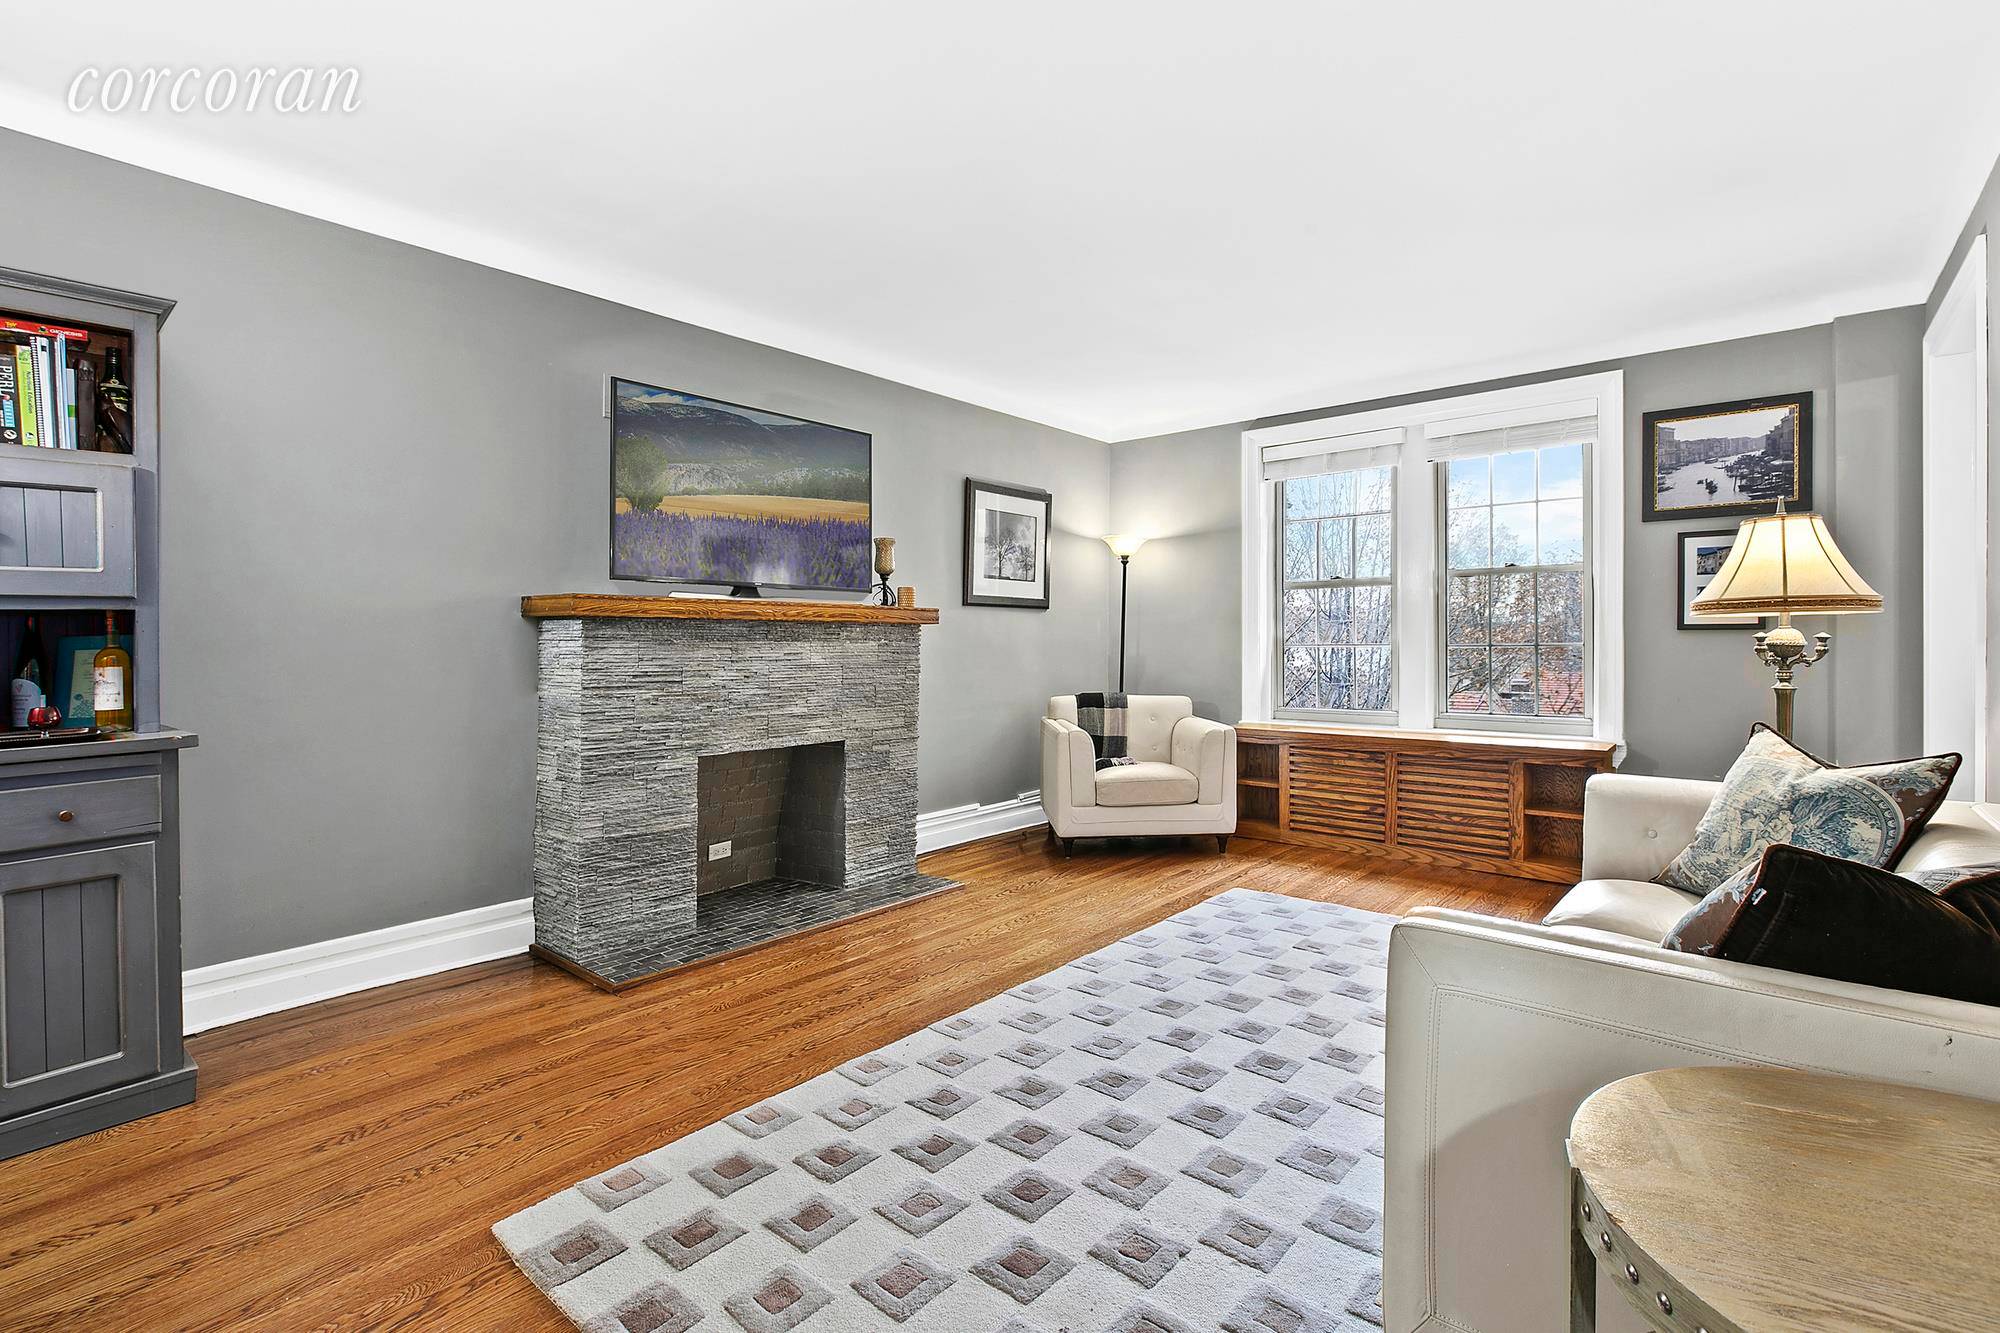 Fantastic Opportunity to own an expansive three bedroom two bathroom home at 150 Burns Street that encompasses northern, southern, and eastern exposures, and enjoys day long natural light.